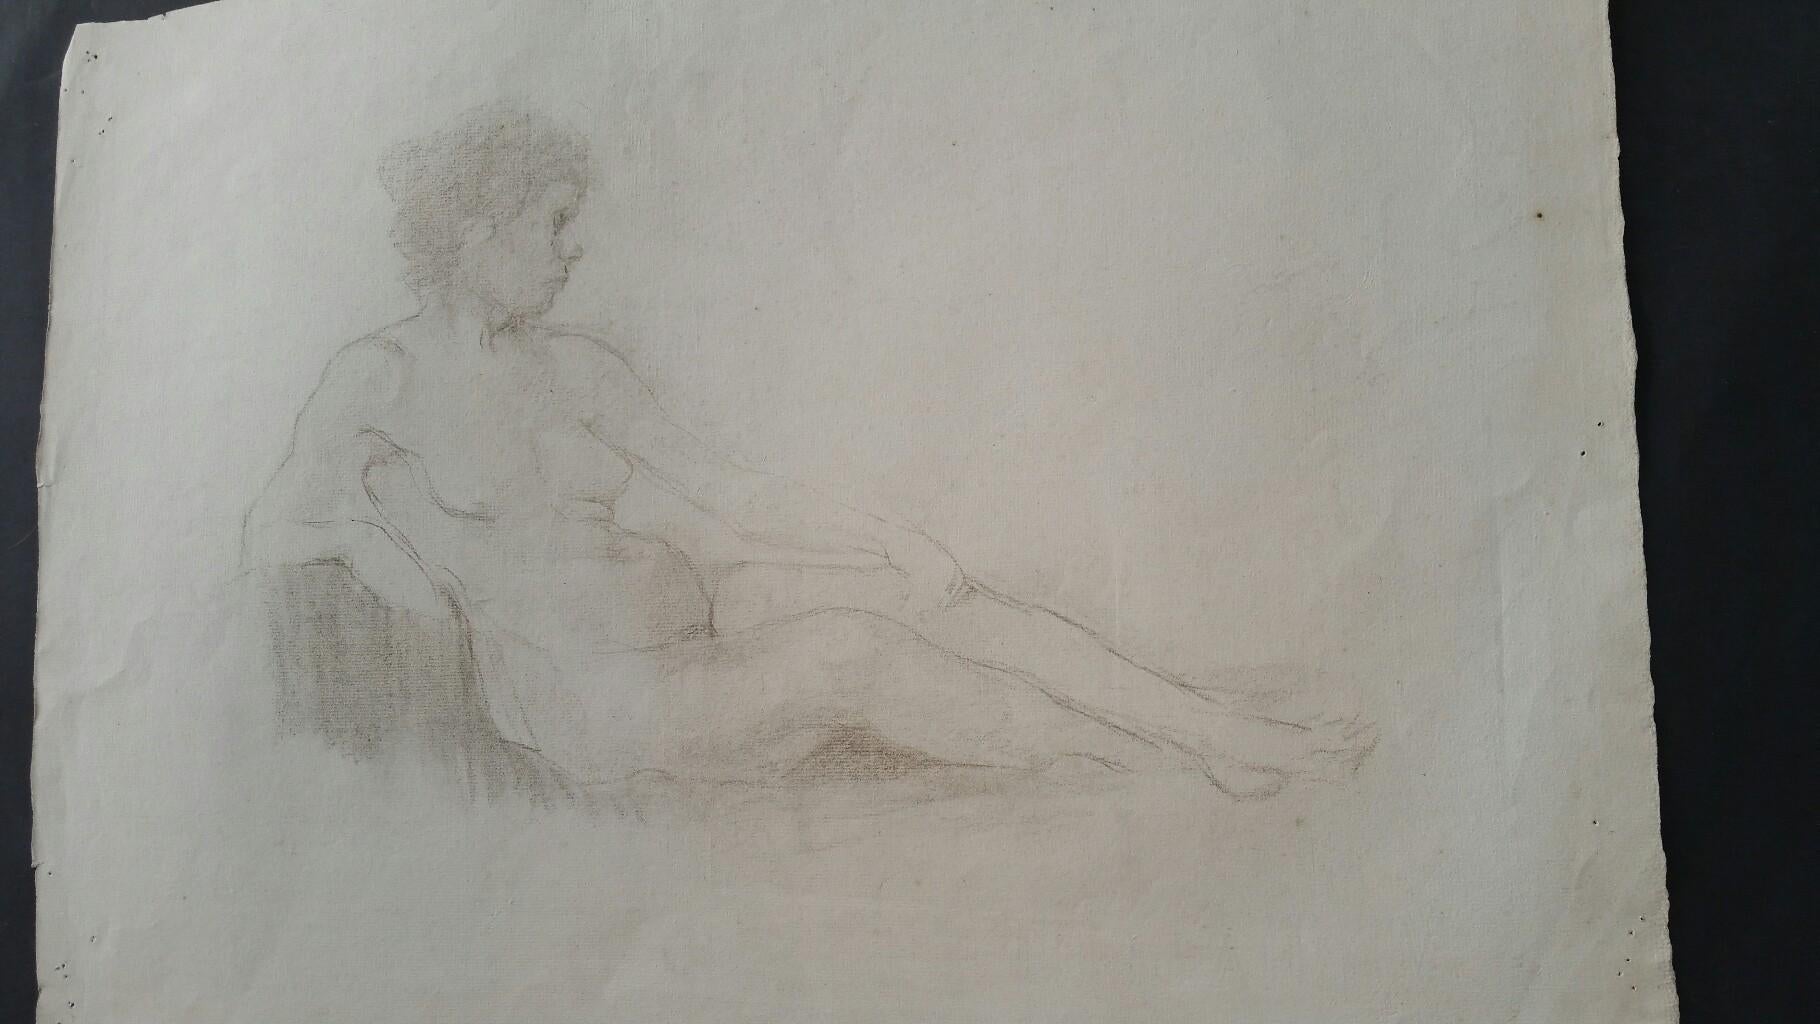 English Graphite Sketch of a Female Nude, Reclining (double sided sheet, another similar image verso)
by Henry George Moon (British 1857-1905)
on off white artists paper, unframed
measurements: sheet 15 x 21 inches 

provenance: from the